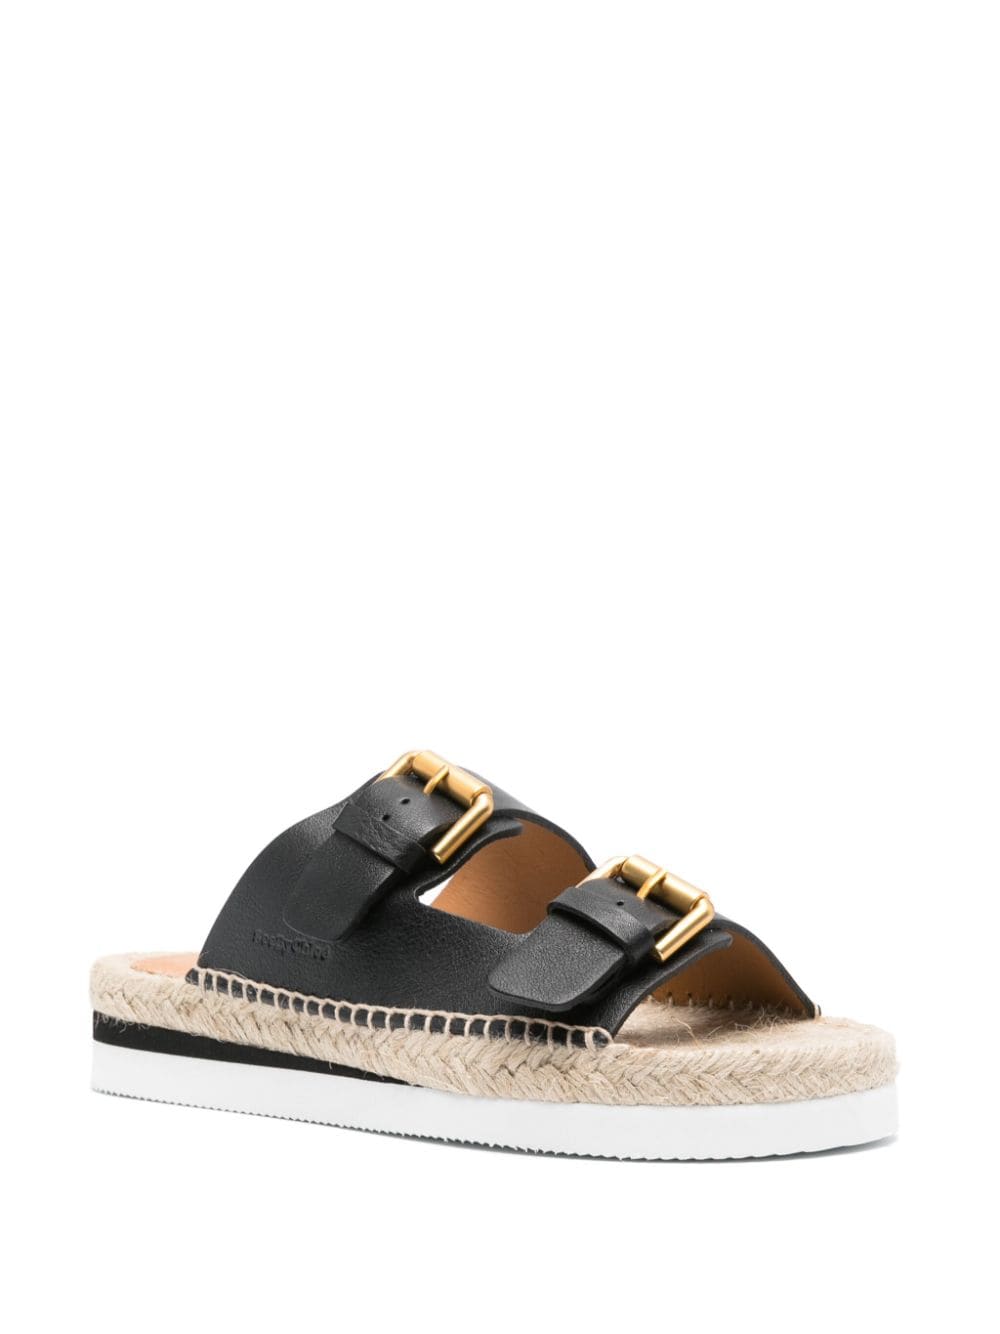 Image 2 of See by Chloé double strap leather sandals